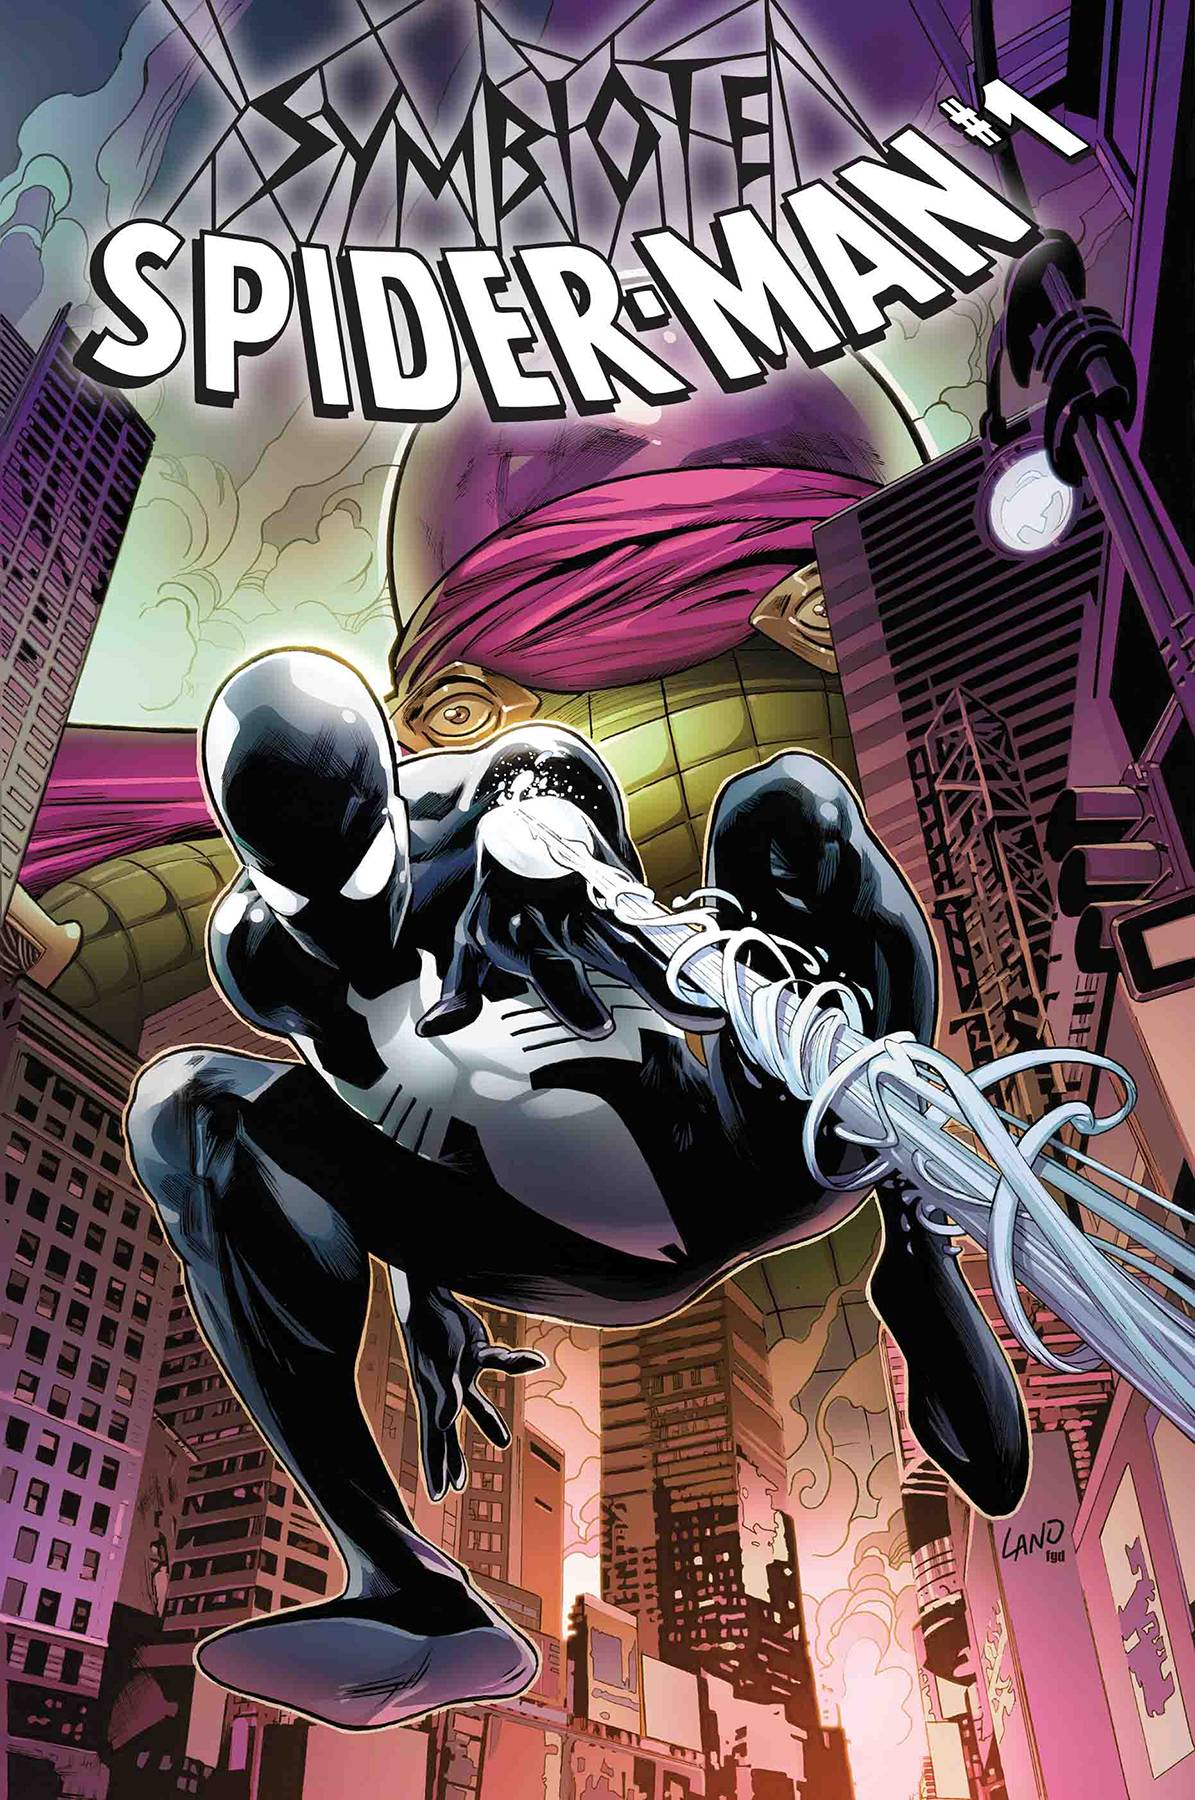 SYMBIOTE SPIDER-MAN #1 BY LAND POSTER